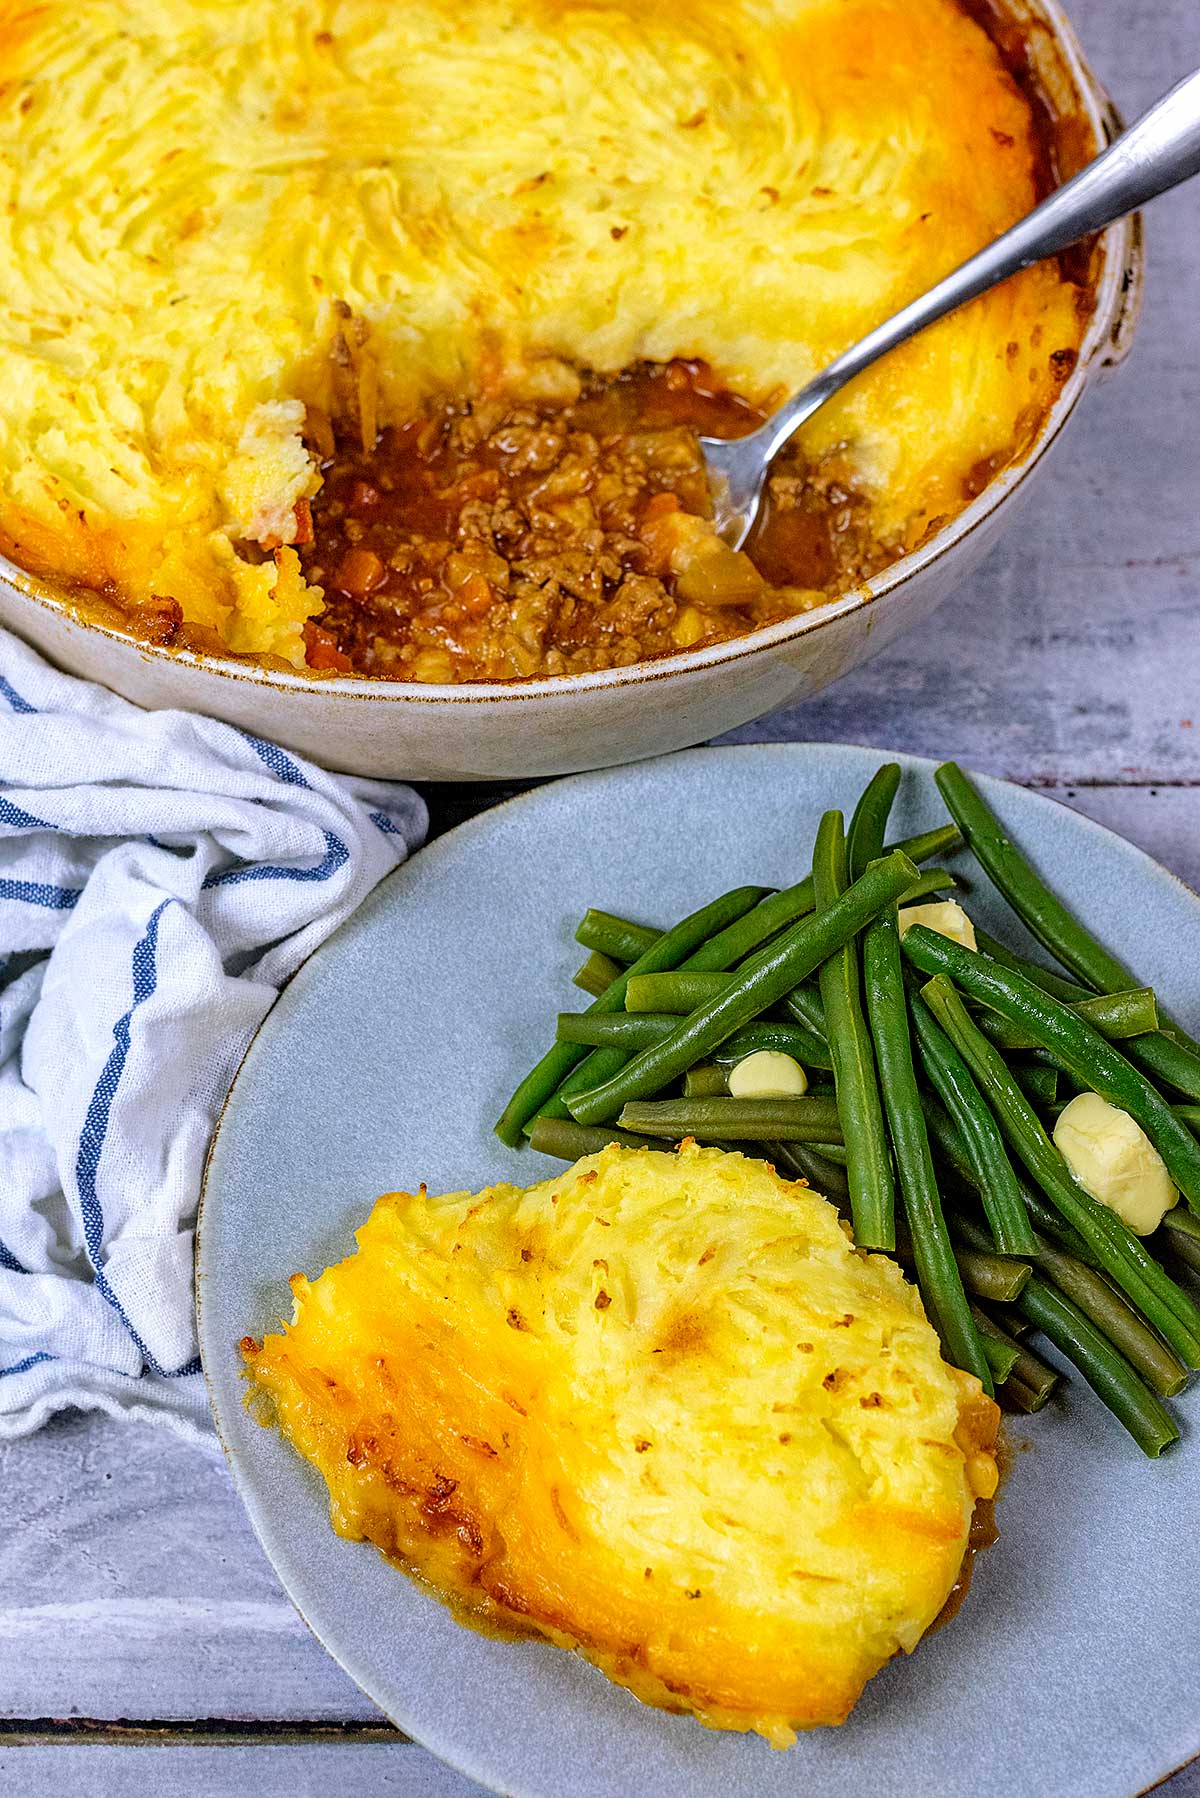 A plate of shepherd's pie and green beans in front of a large dish of more pie.